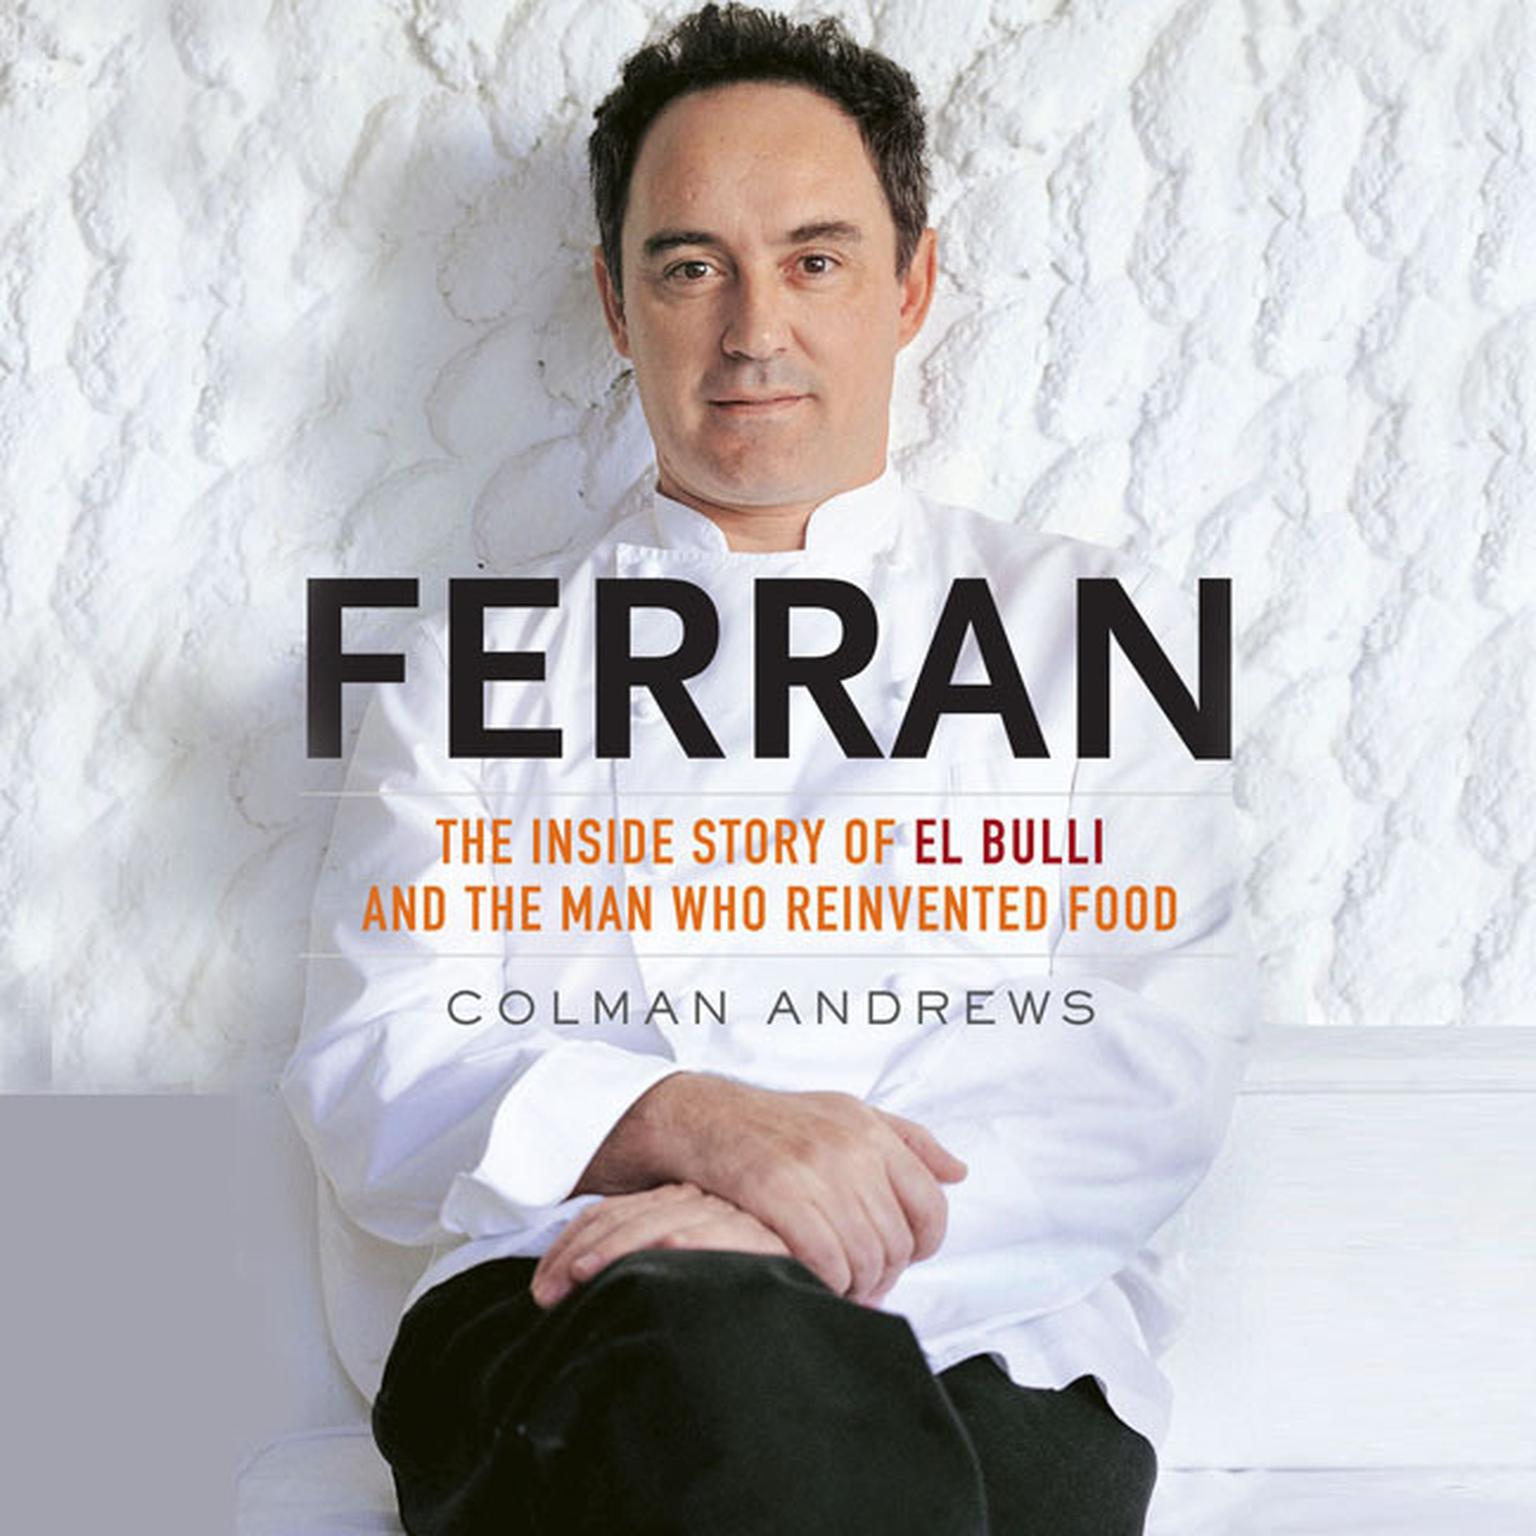 Ferran: The Inside Story of El Bulli and the Man Who Reinvented Food Audiobook, by Colman Andrews